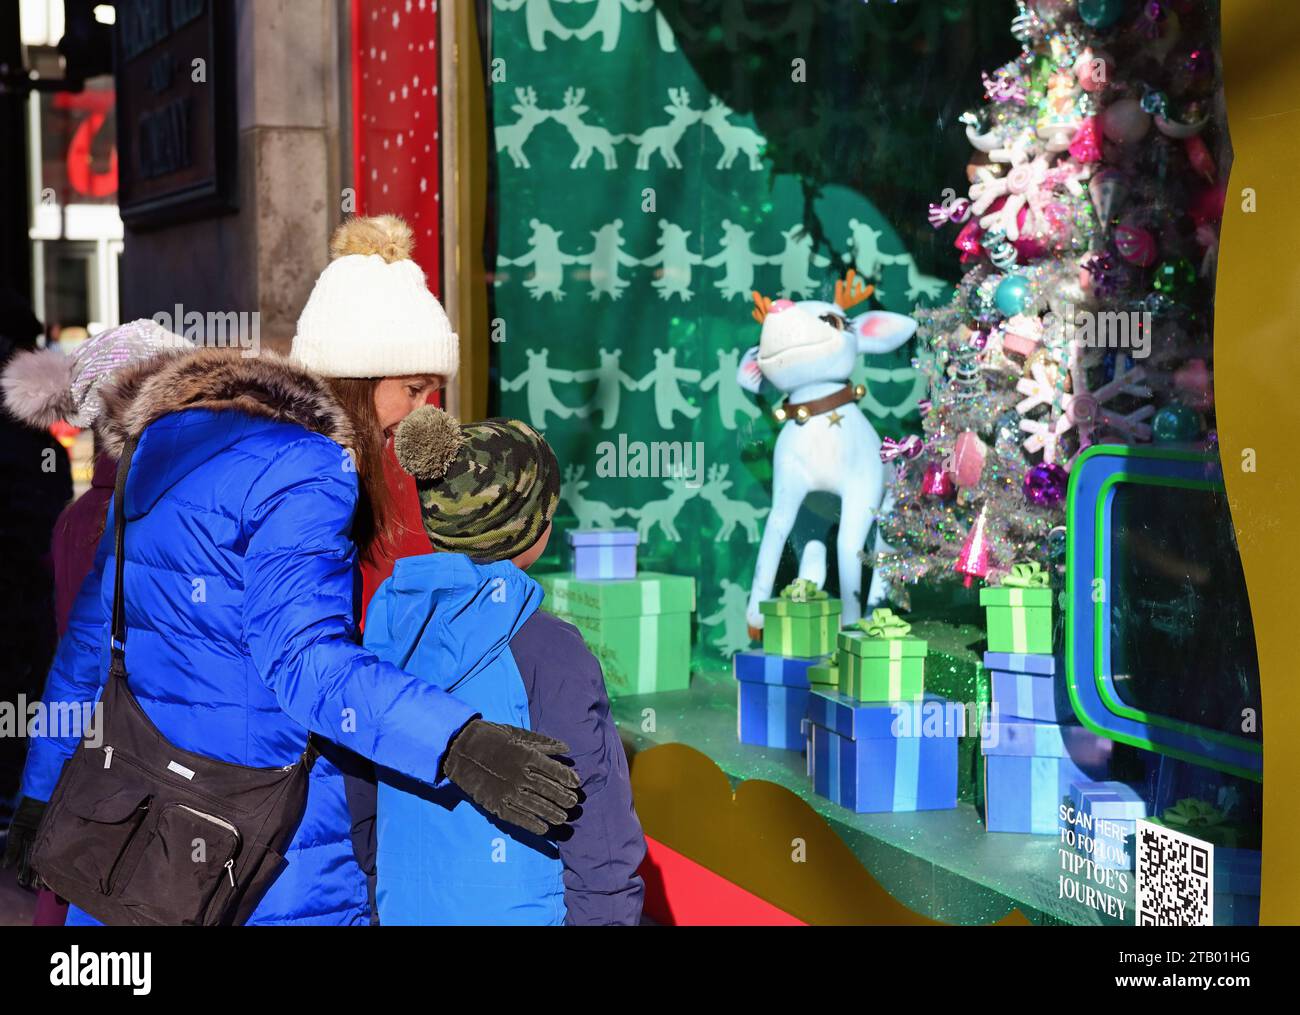 Chicago, Illinois, USA. Children, along with their mother, gaze at a window at Macy's on State Street decorated for Christmas. Stock Photo